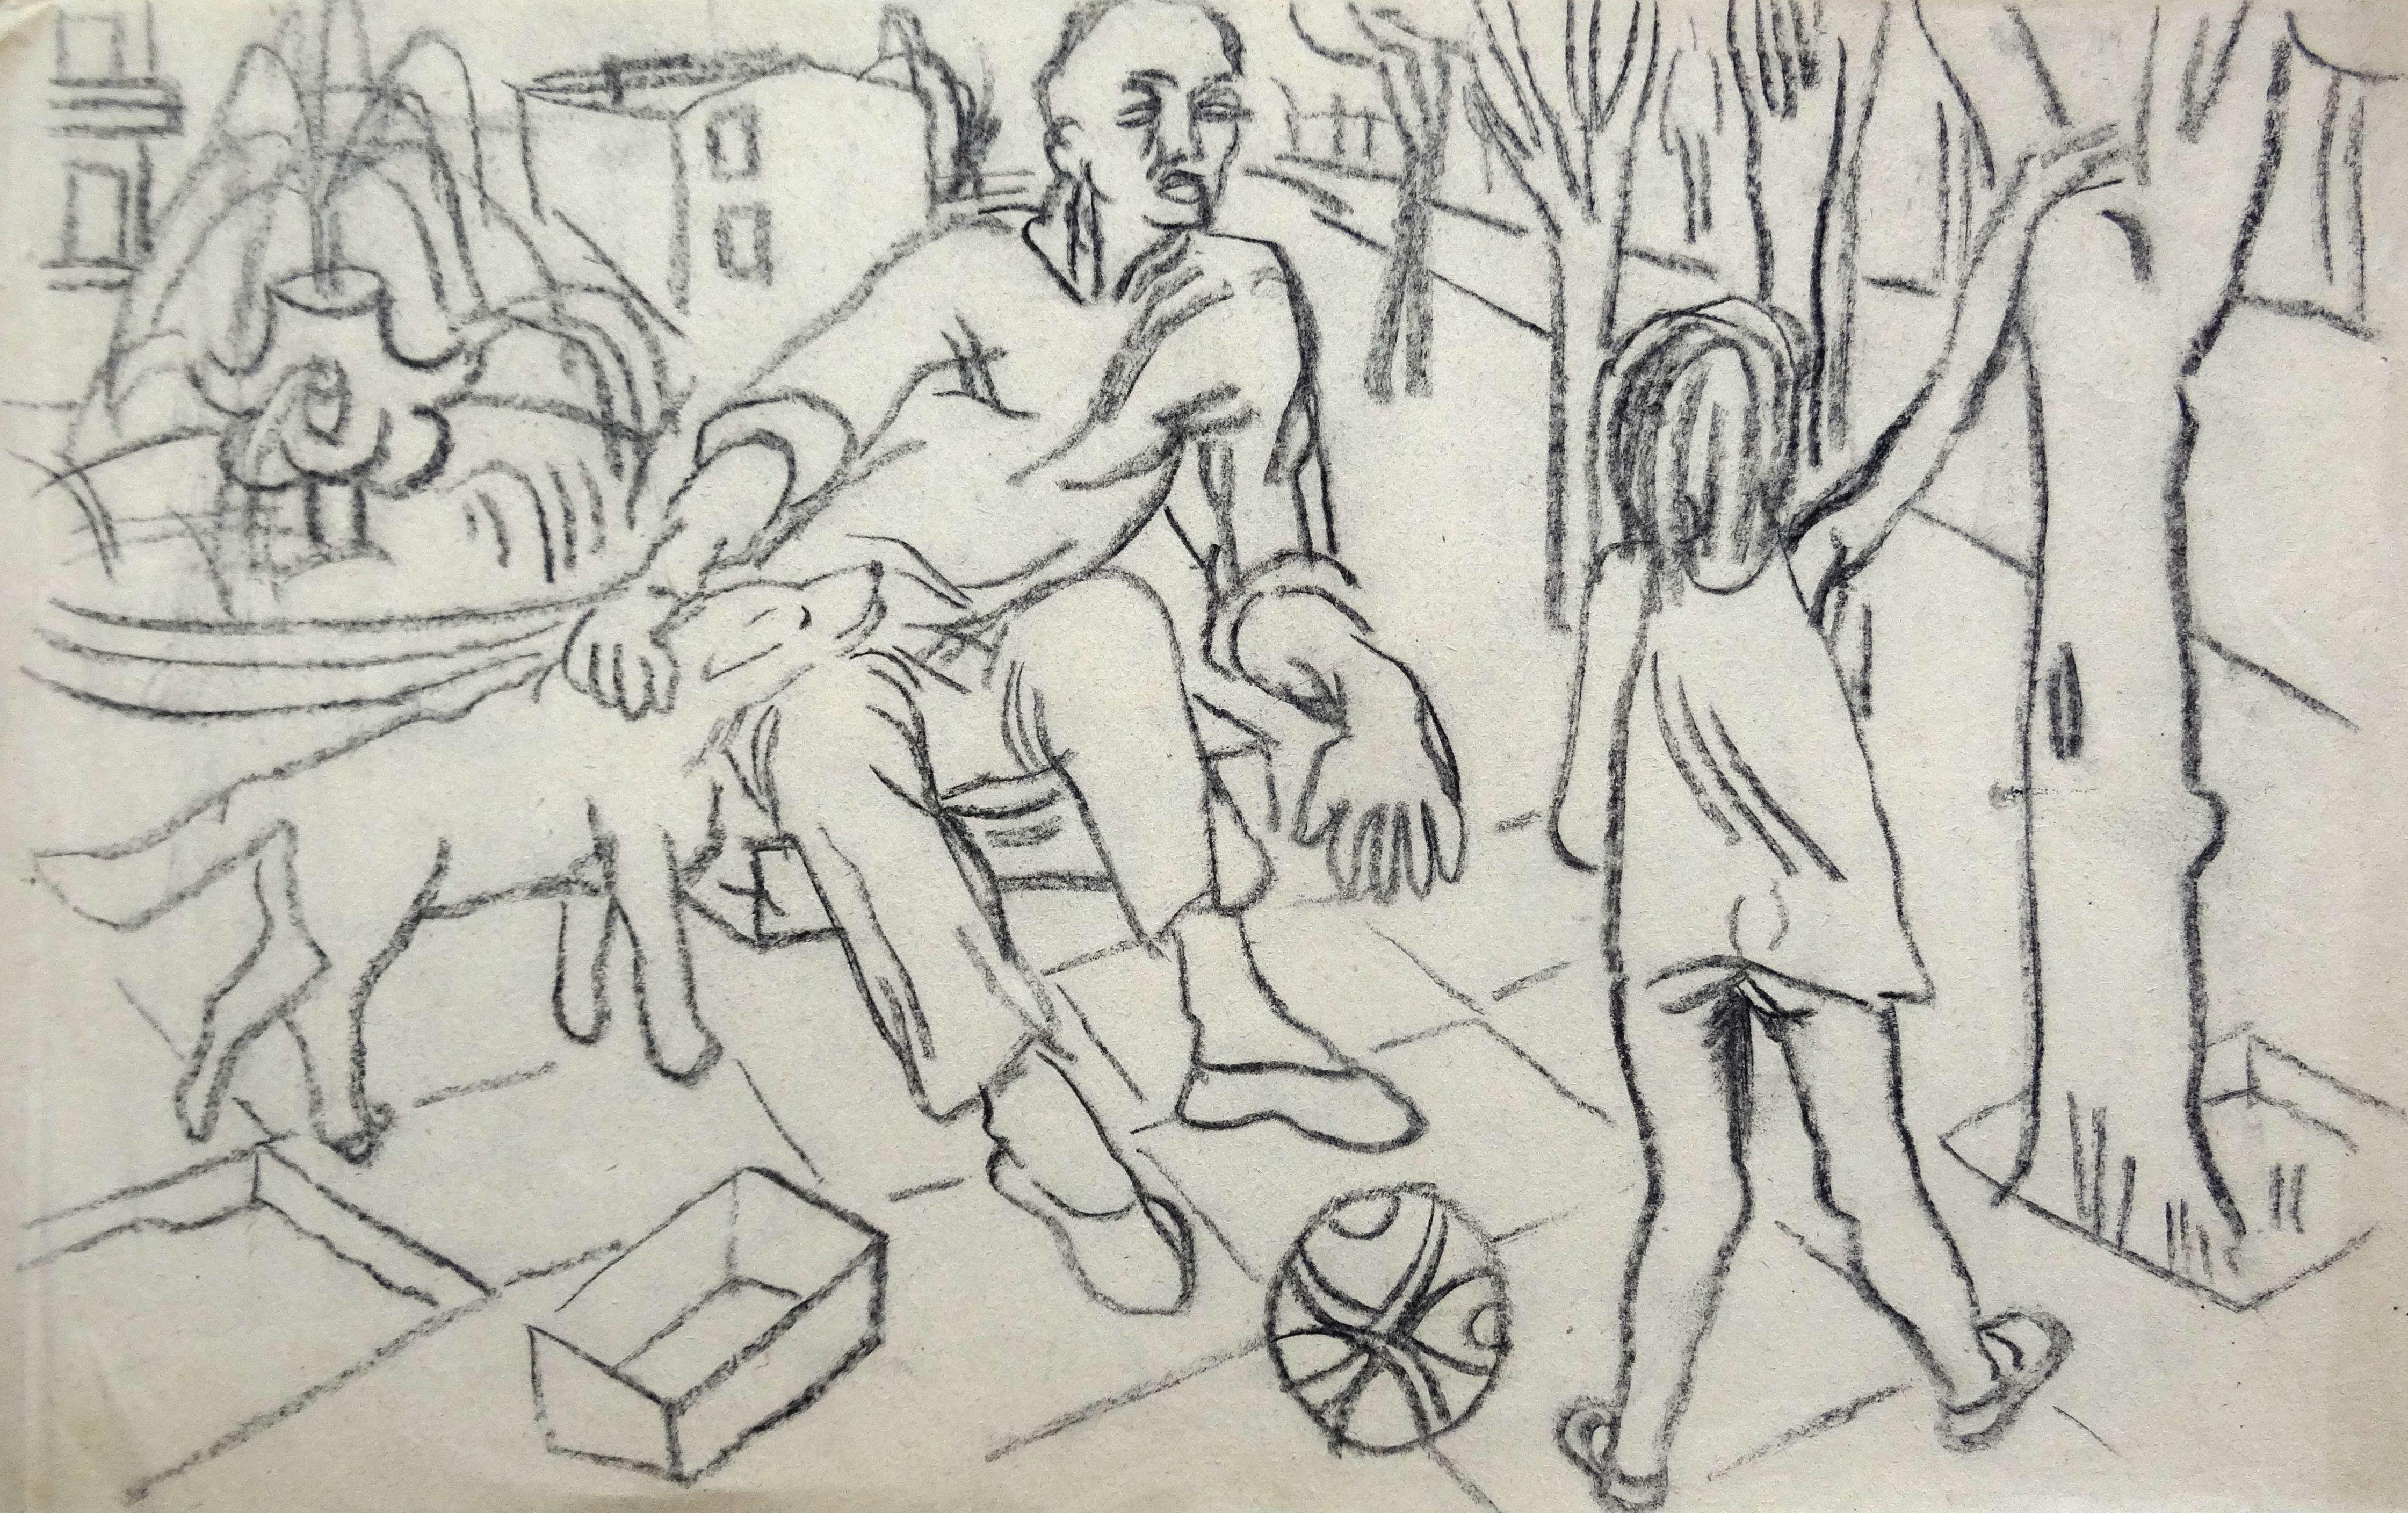 By the fountain. Paper, charcoal, 25x40 cm